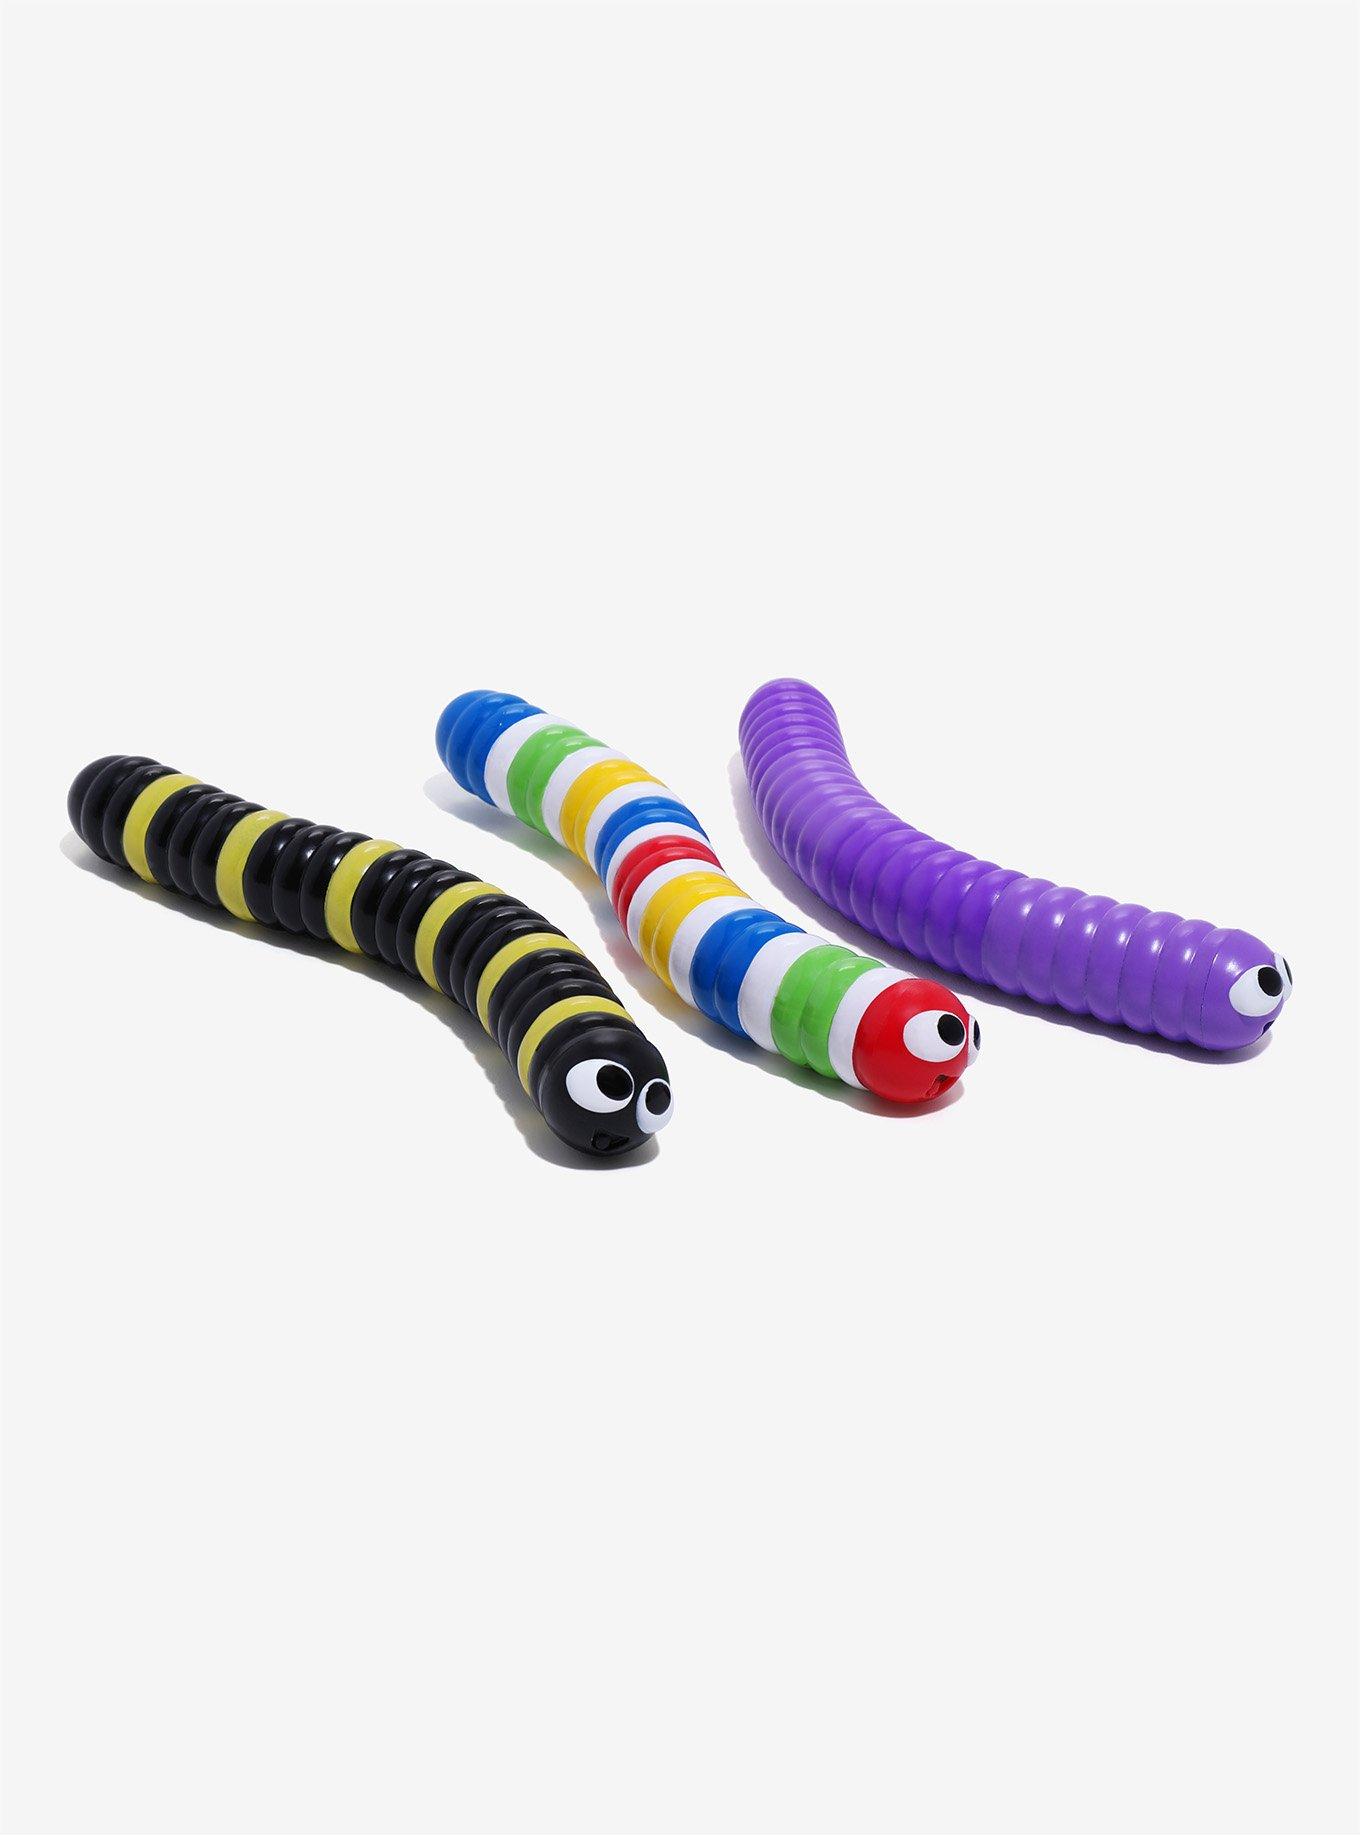 Slither.io Slither 3 Pack With Mystery Series 1 Caterpillars for sale online